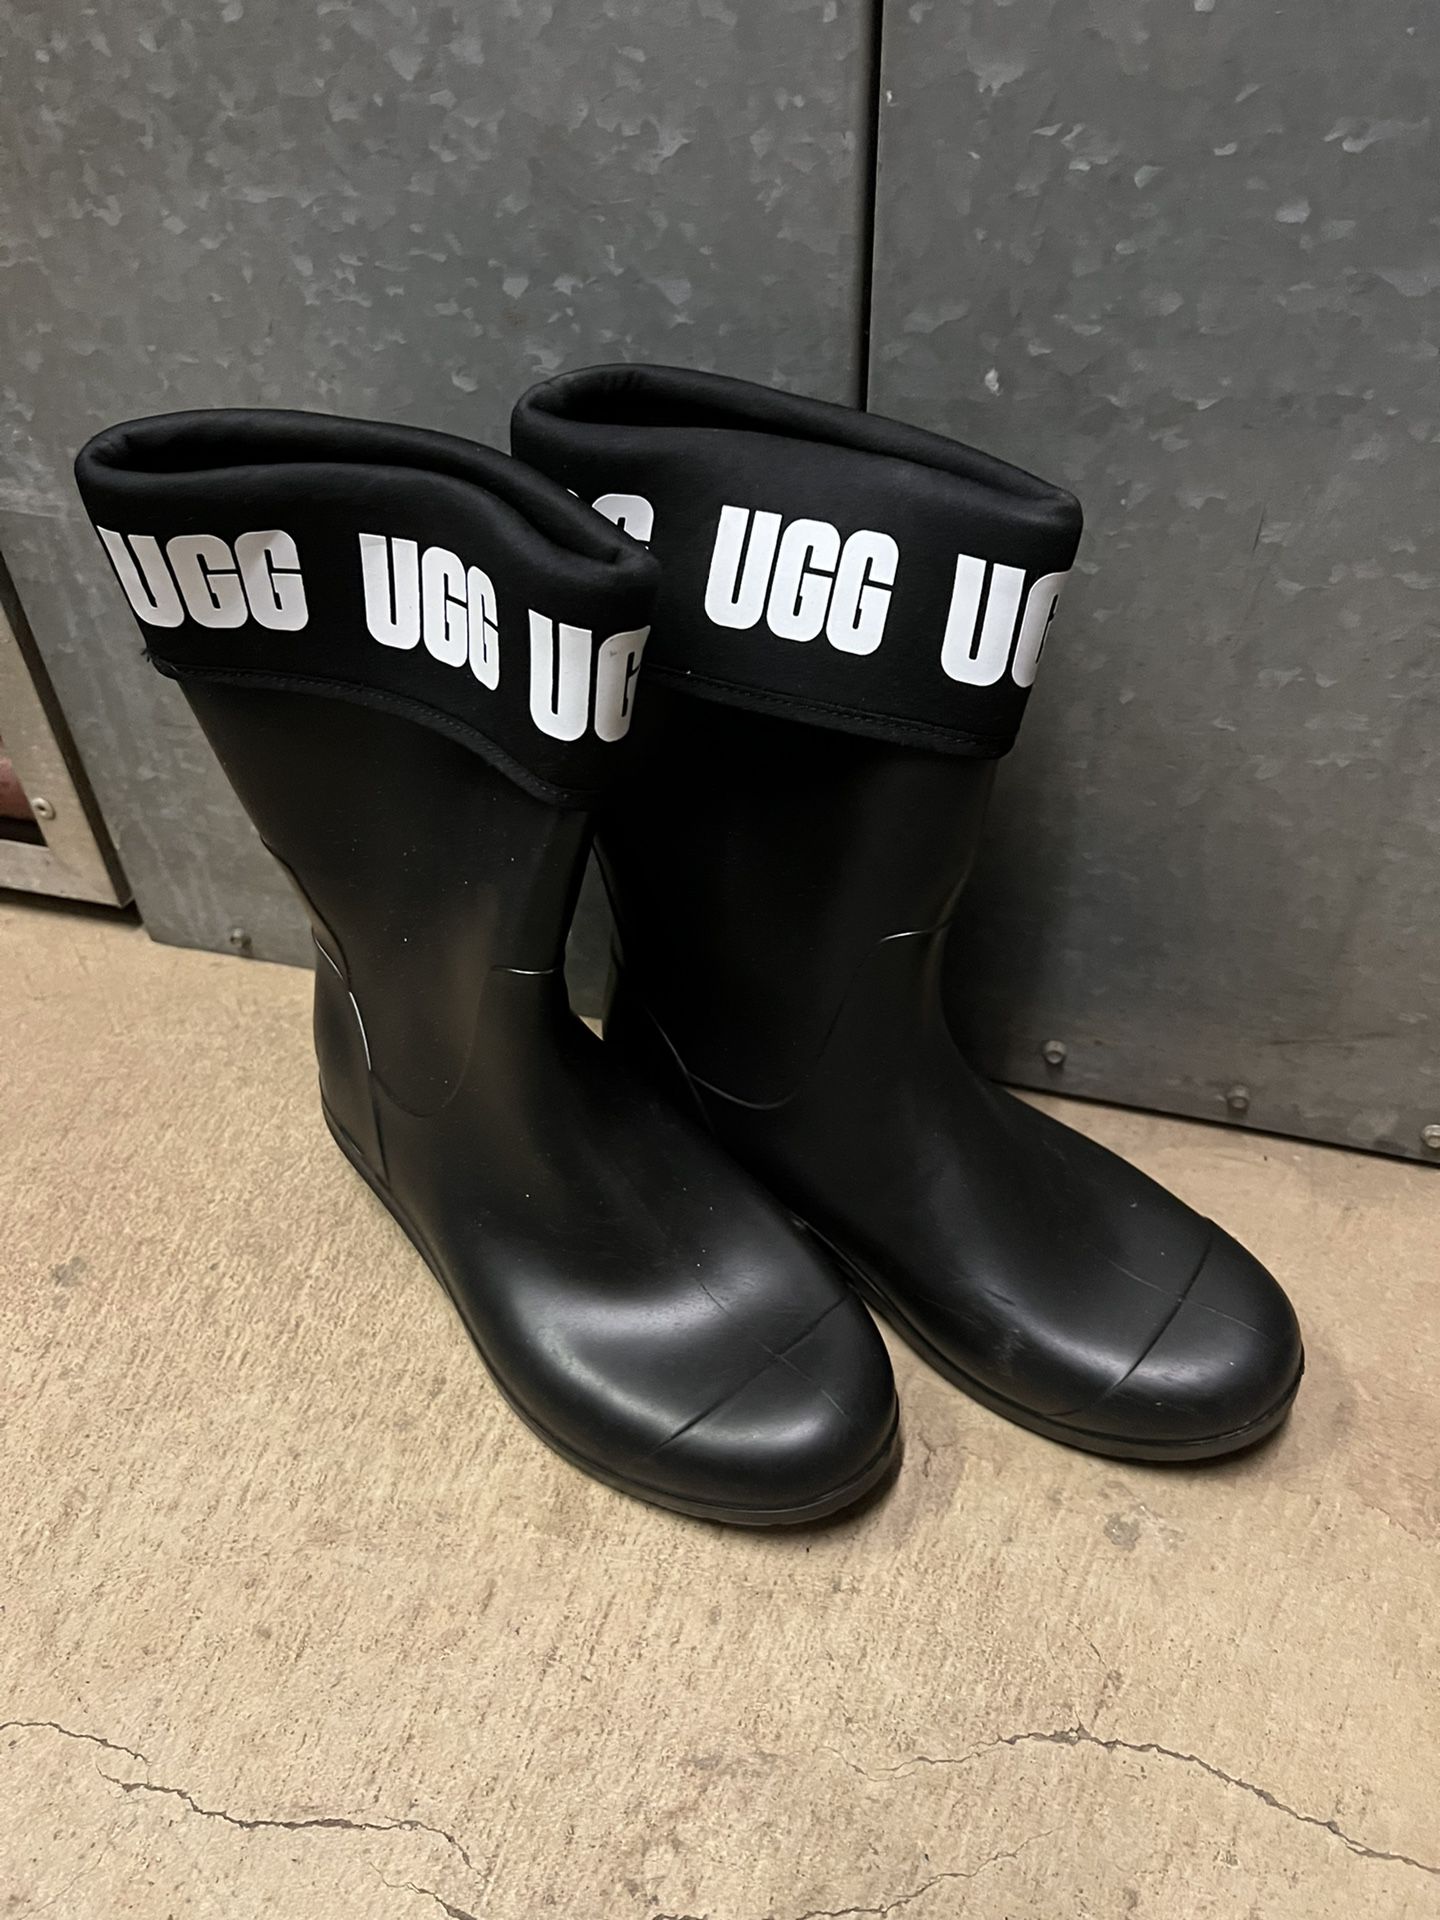 FOR SALE UGG WOMENS SIENNA  MATTE GRAPHIC  RAIN BOOTS SIZE 7 